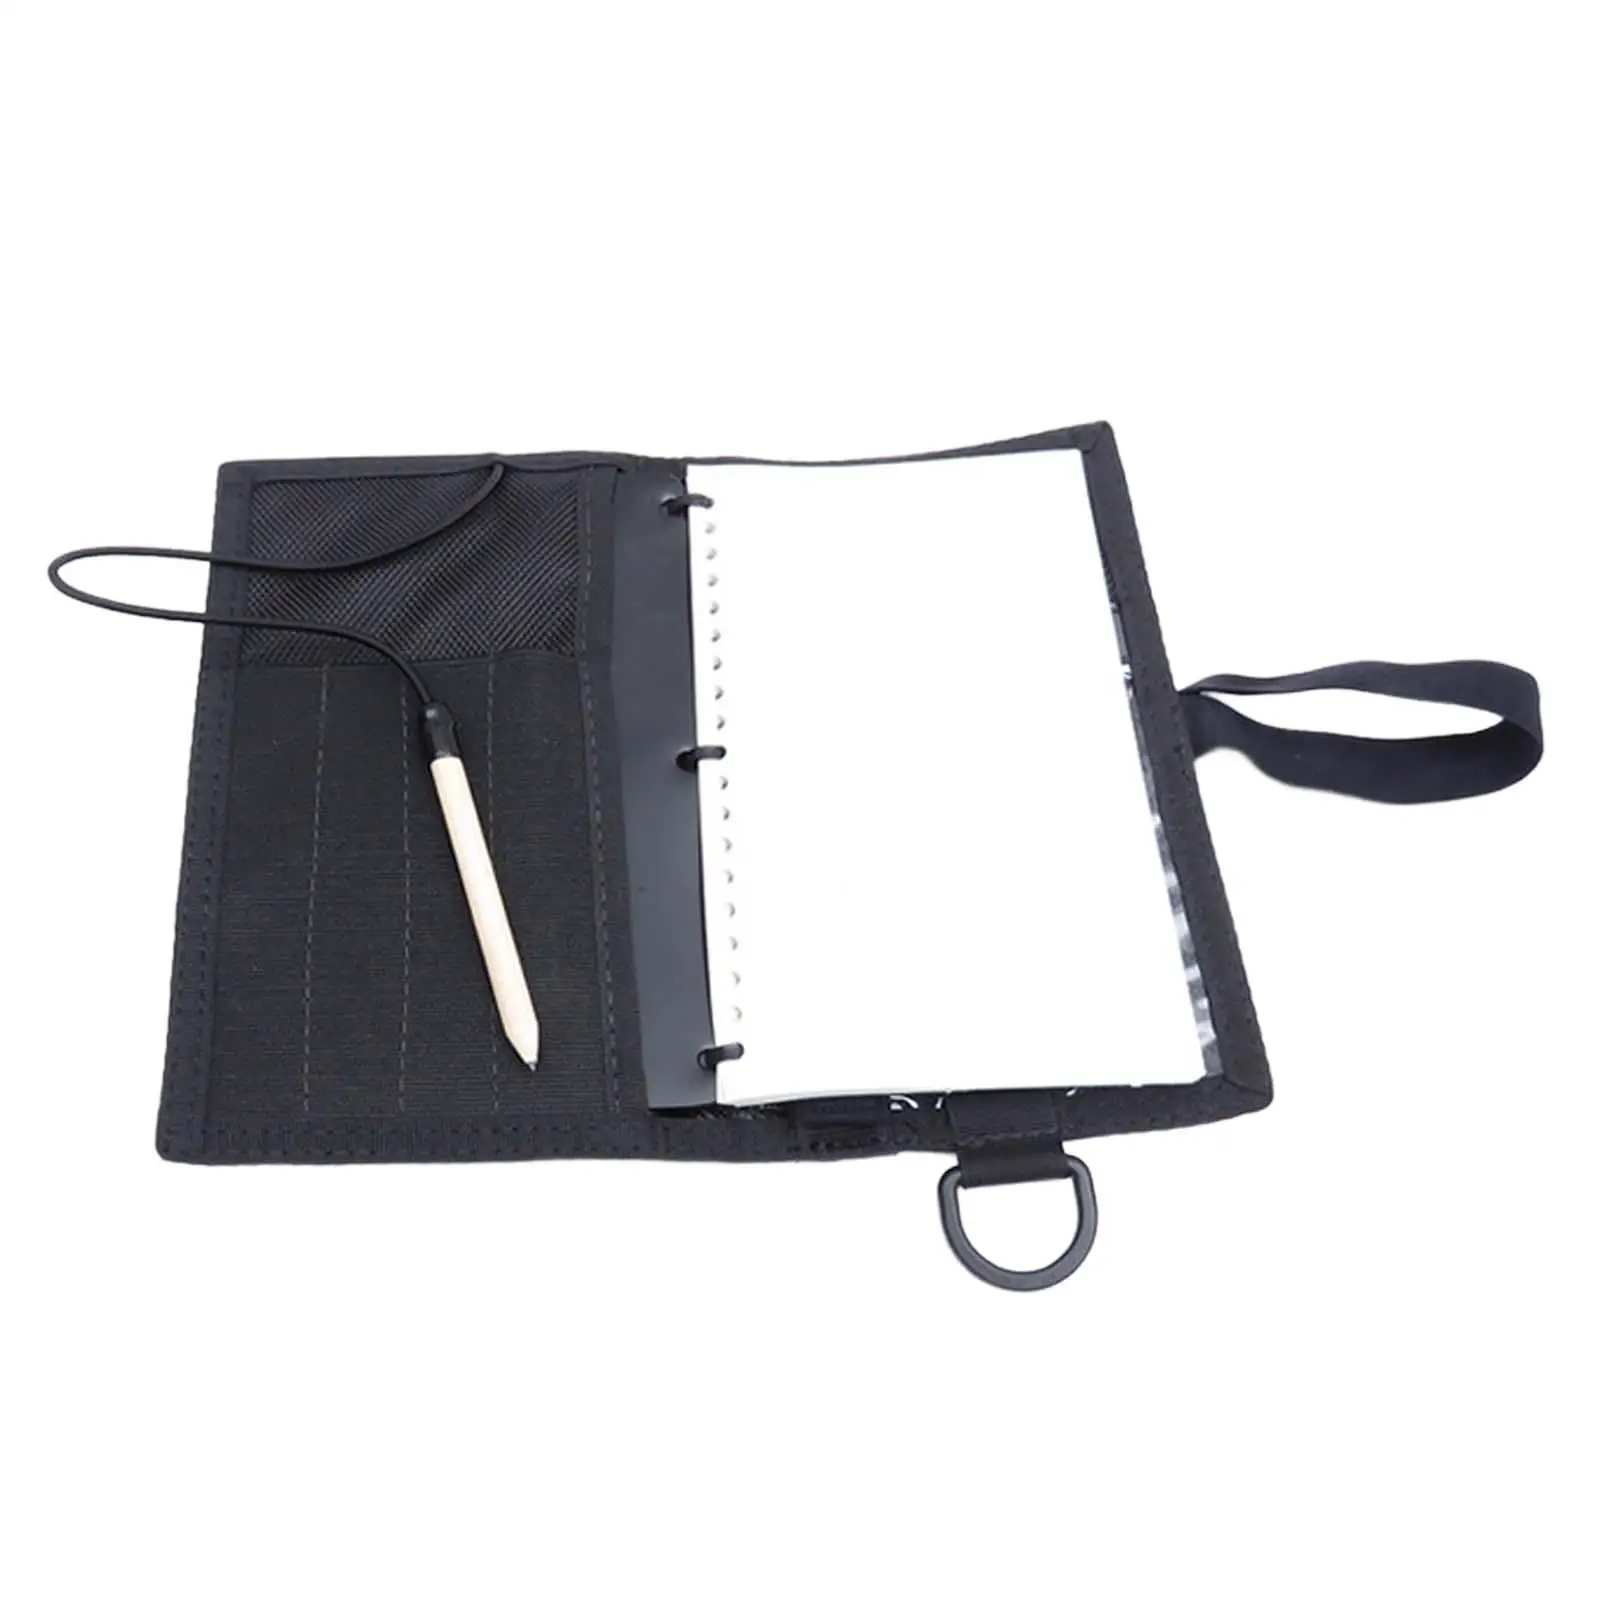 Underwater Writing Slate Diving Notebook Dive Writing Slate for Swimming Making Some Notes Underwater Men and Women Accessories